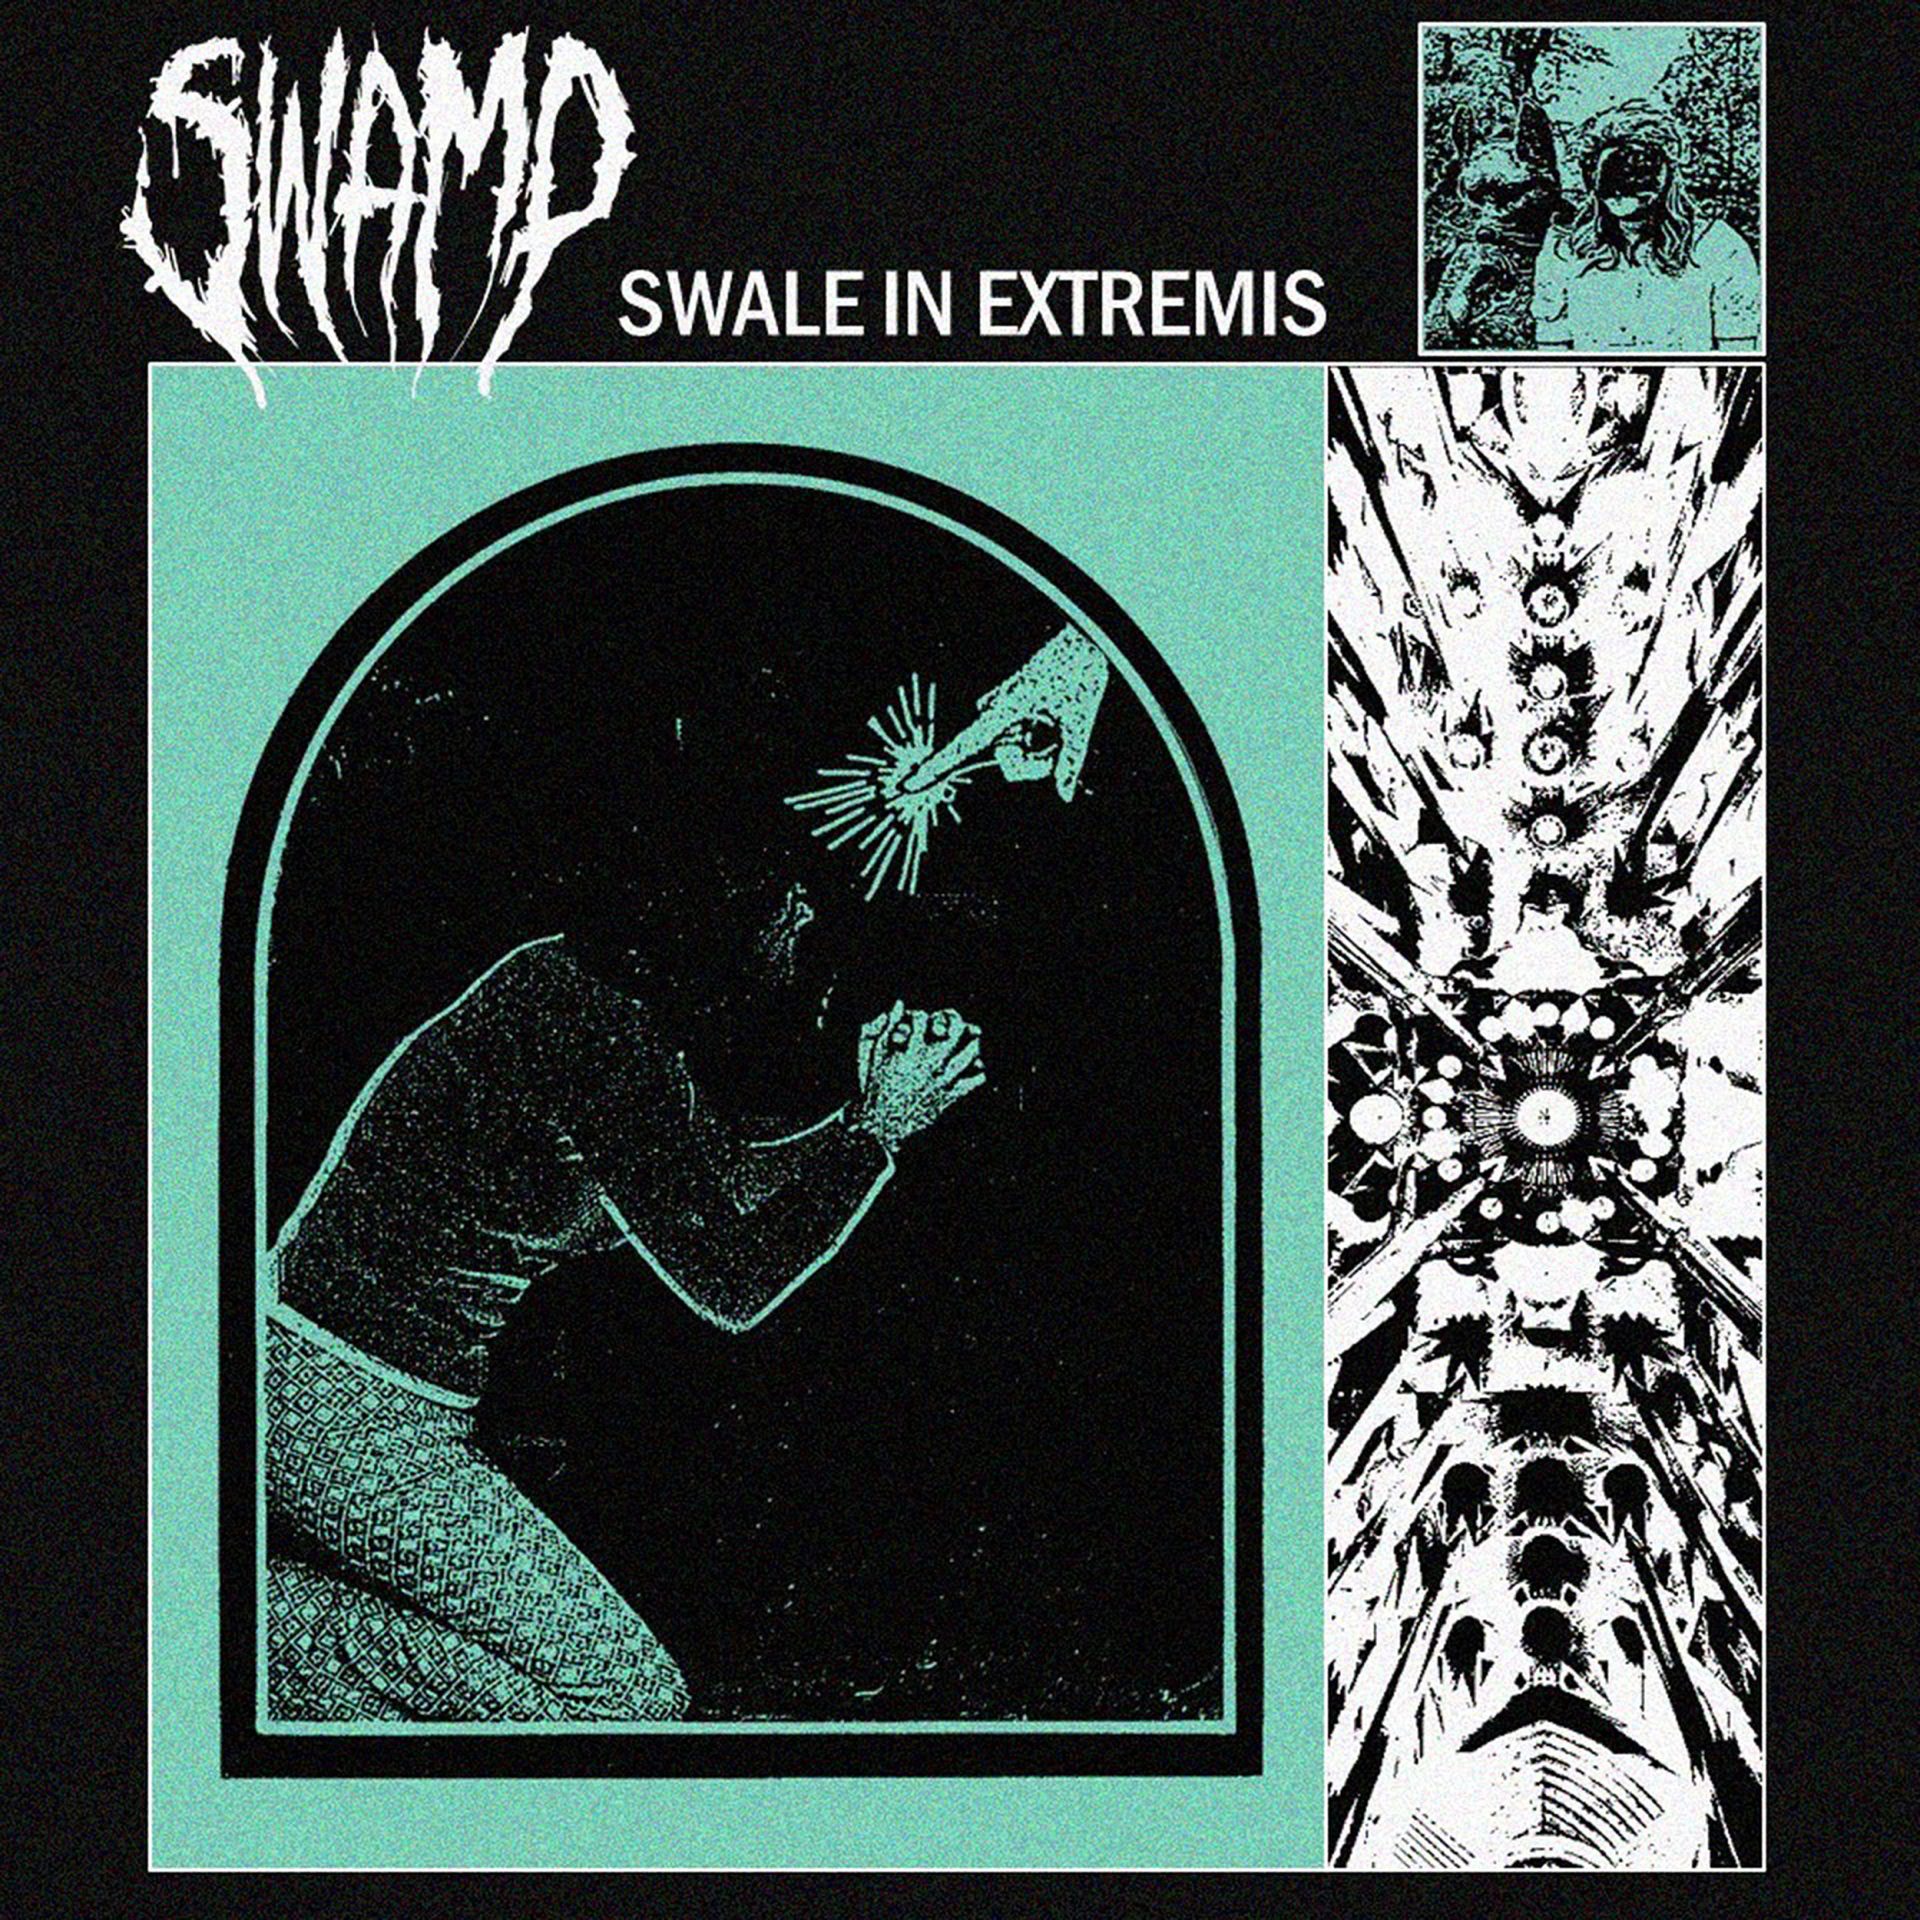 Swamp Swale in Extremis